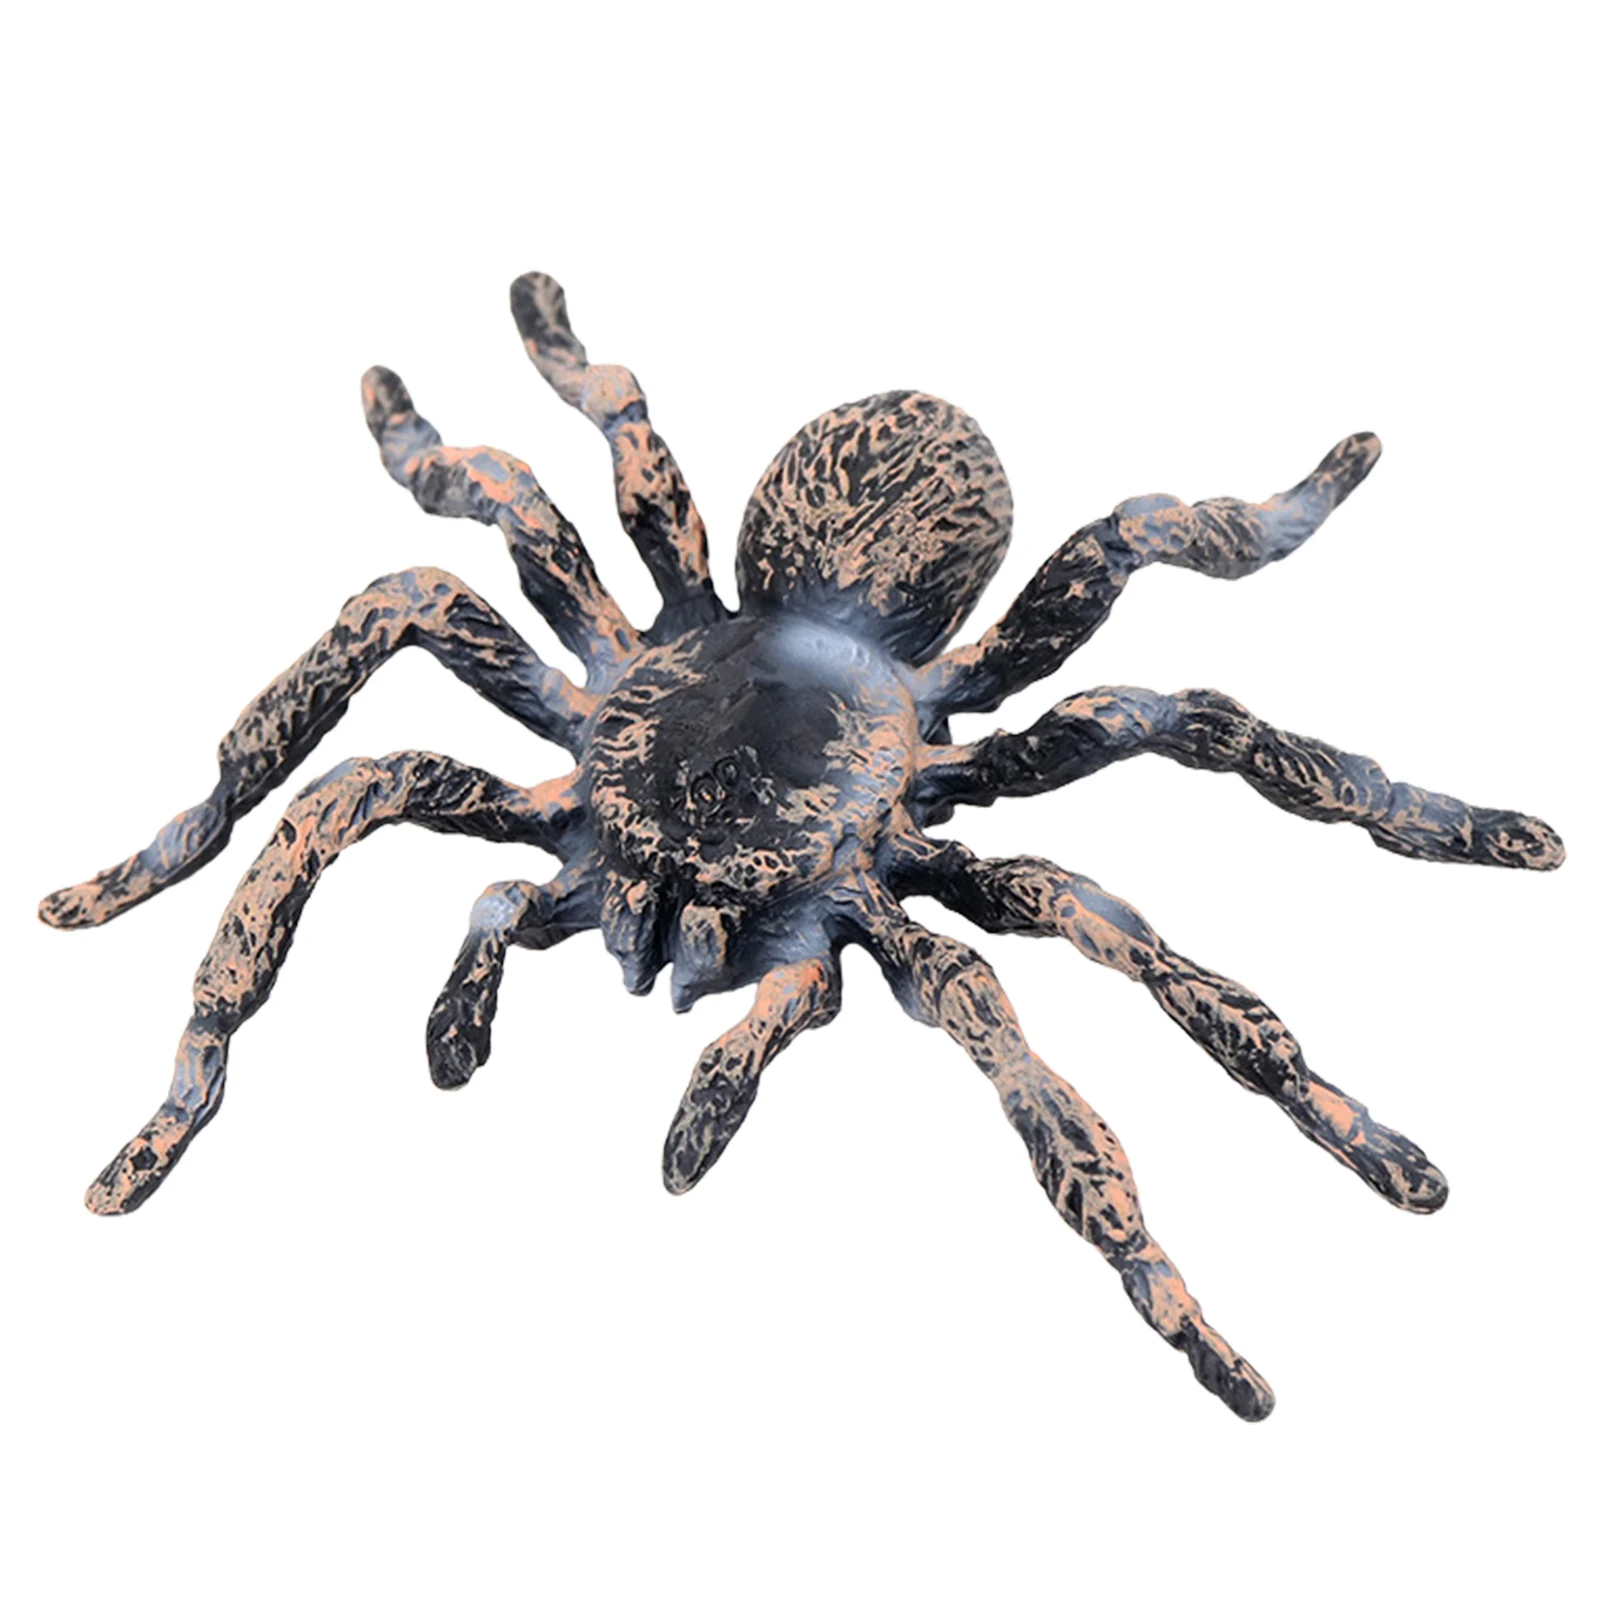 

Tricky Toy Artificial Spider Halloween Decoration Simulated Spider Model Realistic Plastic Spider Figurines Kids' Novelty Toy